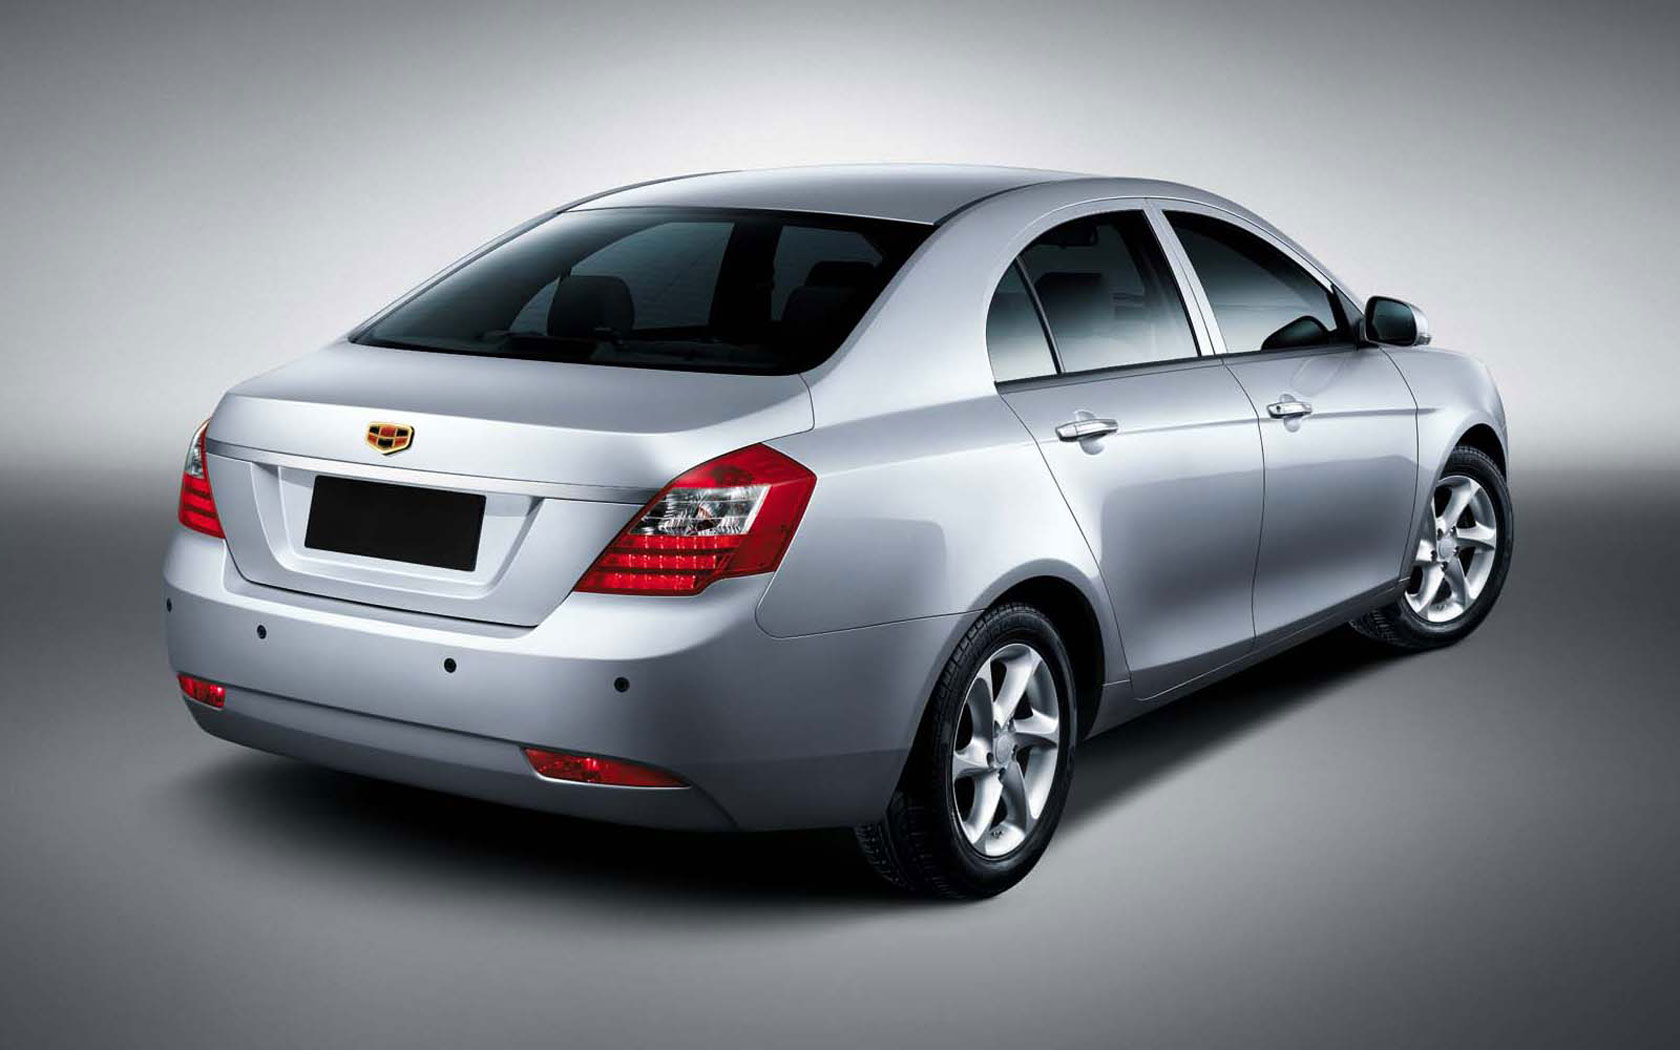  Geely Emgrand (2009-2016)